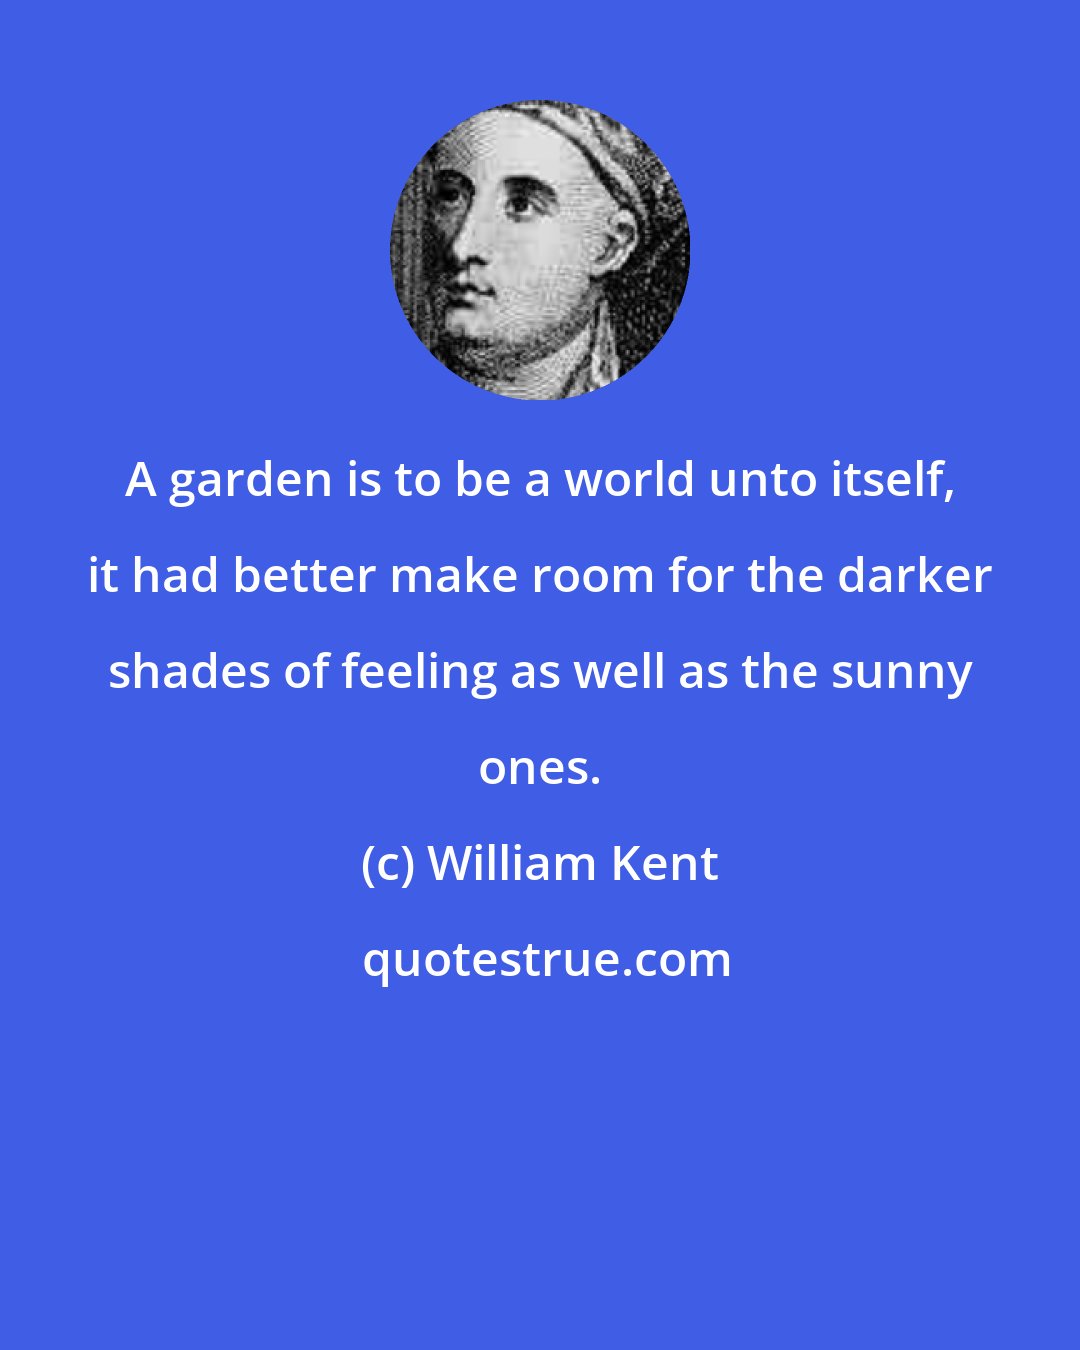 William Kent: A garden is to be a world unto itself, it had better make room for the darker shades of feeling as well as the sunny ones.